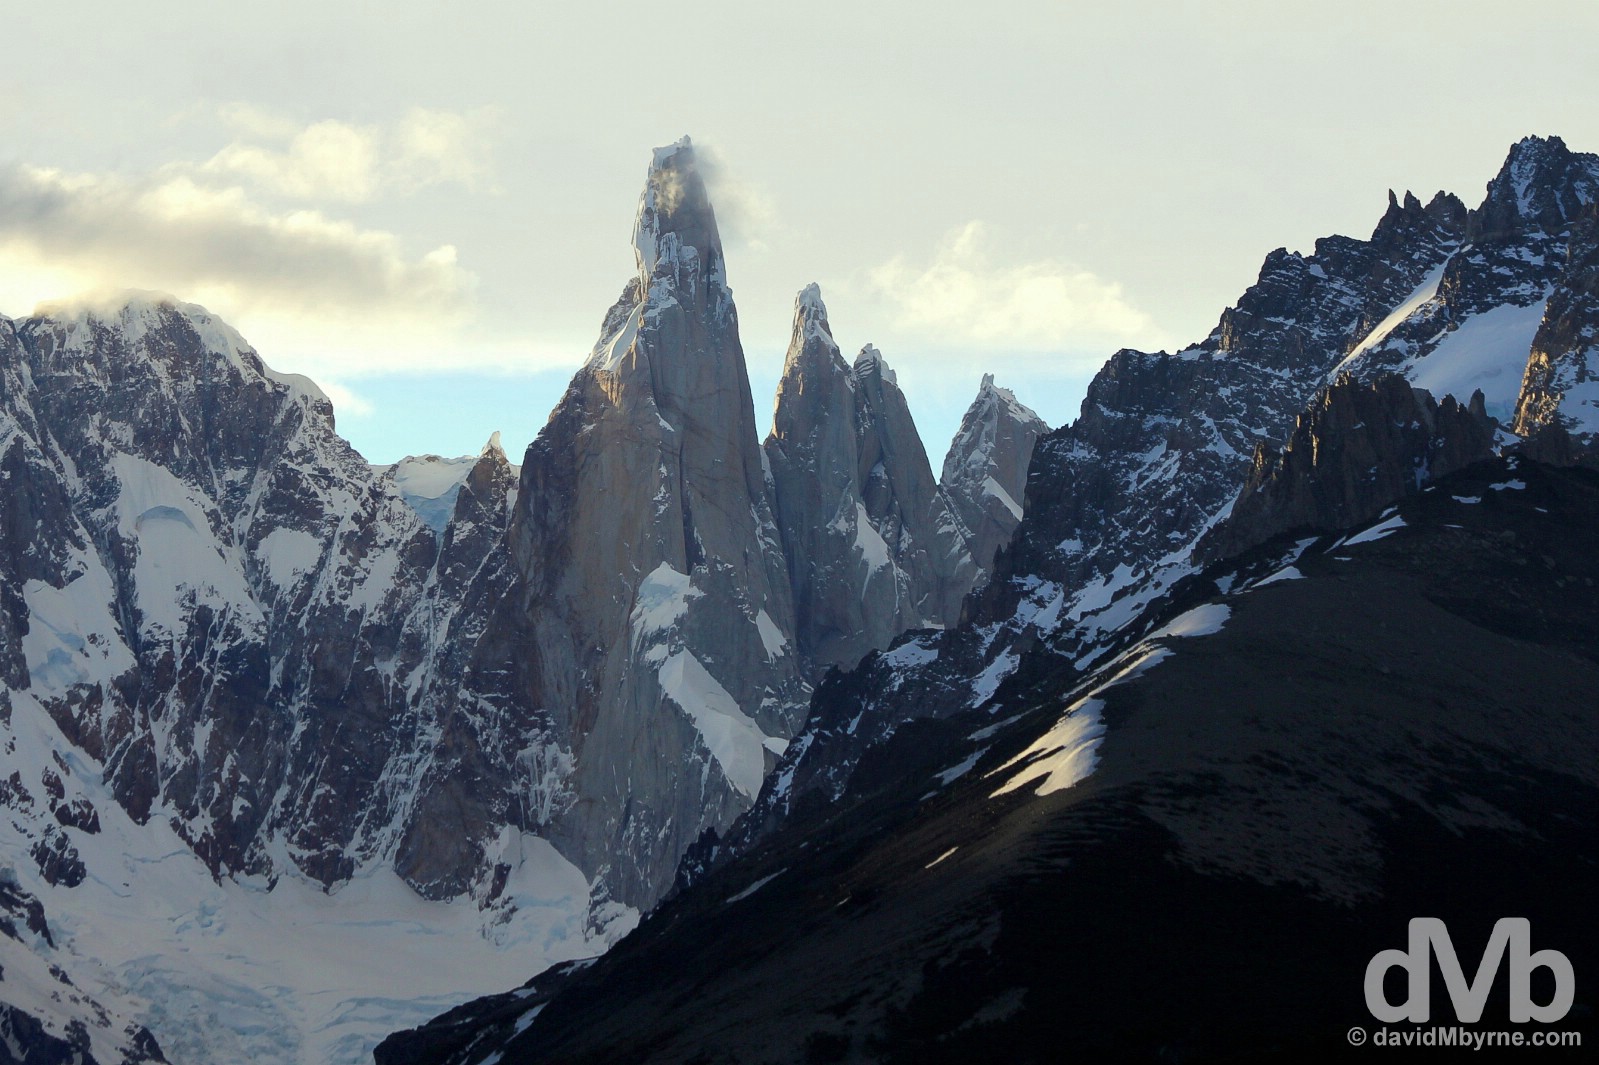 The last rays of the day on the distinctive, needle-like peak of Cerro Torre in Parque Nacional Los Glaciares, southern Patagonia, Argentina. November 3, 2015.